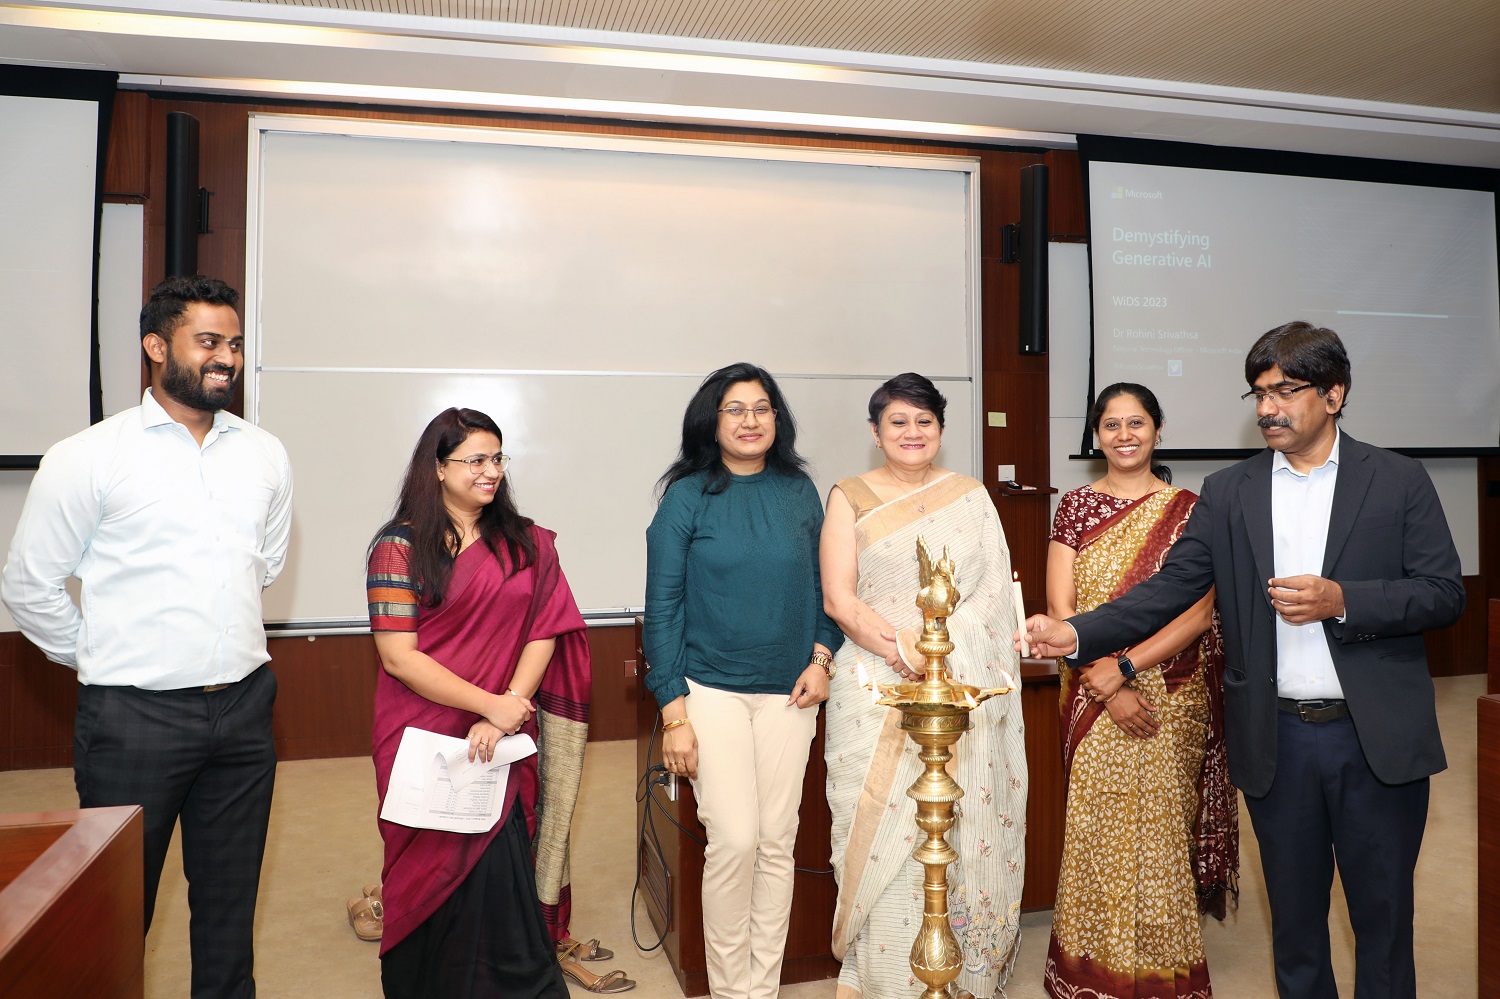 Prof. U Dinesh Kumar, Chairperson, Data Centre and Analytics Lab, IIMB lights the ceremonial lamp to inaugurate Women in Data Science Bangalore Conference 2023 on 8th April at IIMB.